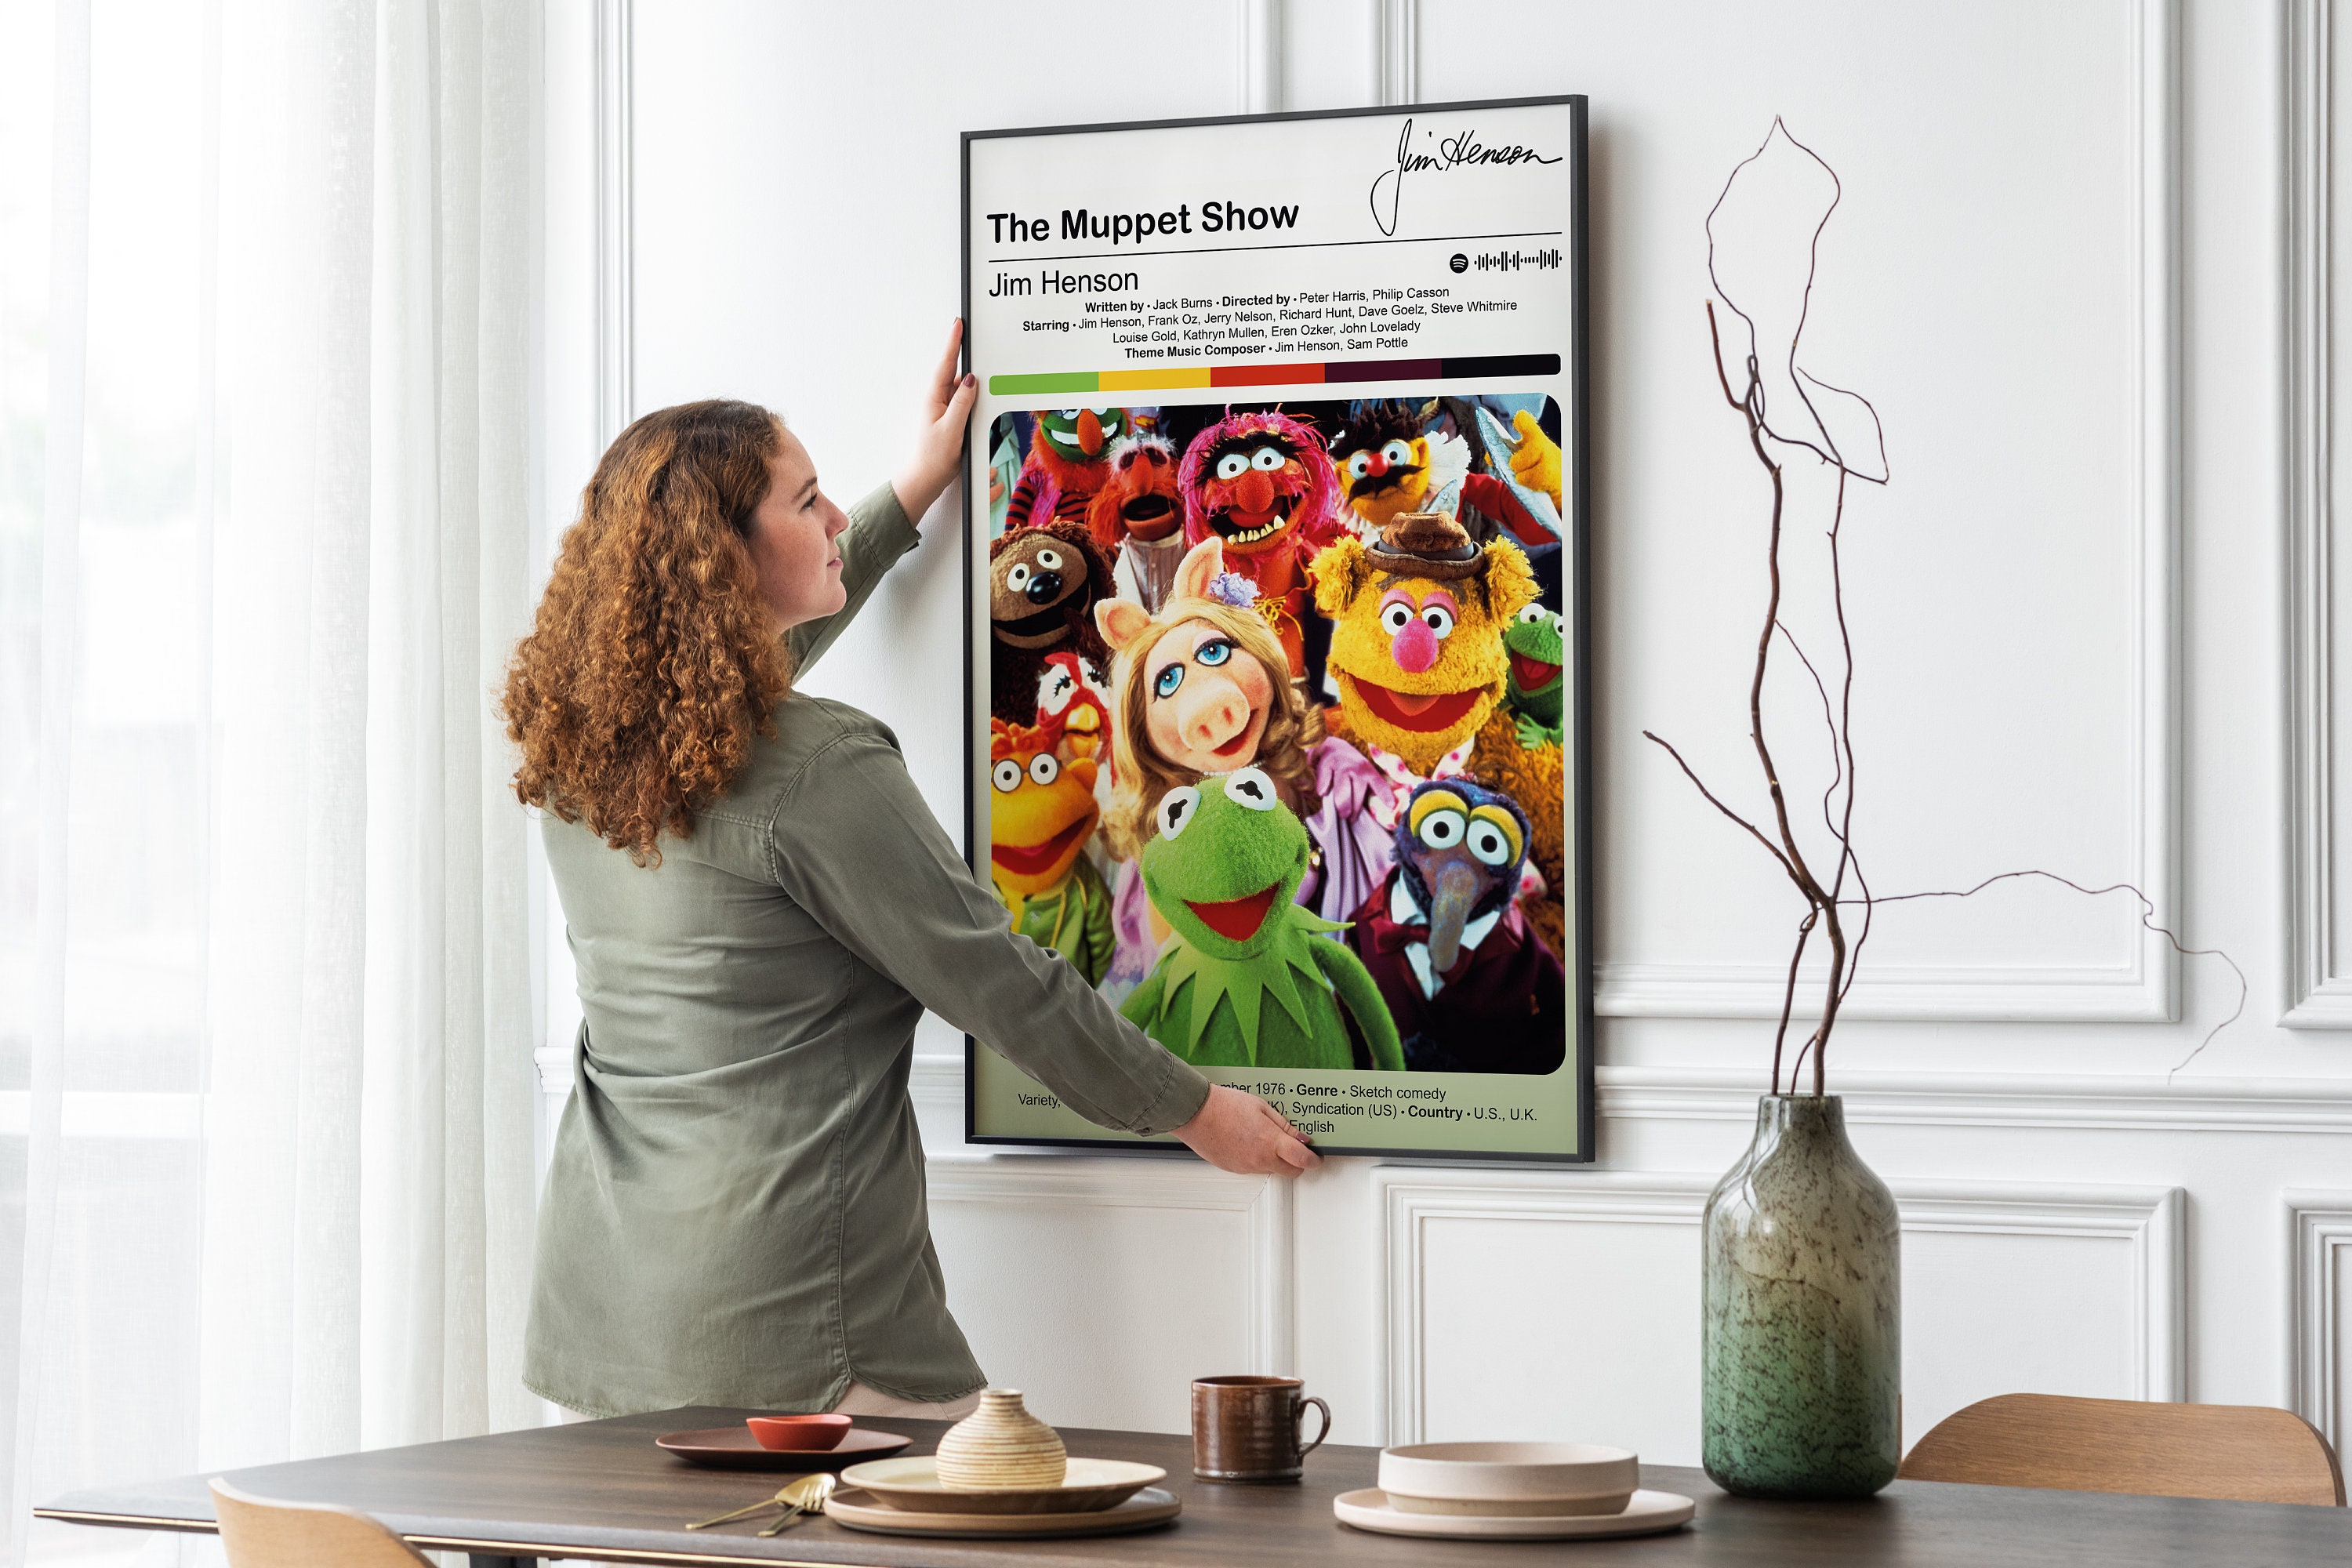 The Muppet Show by Triposter, The Muppet Show Art, Muppet Show Gift ...